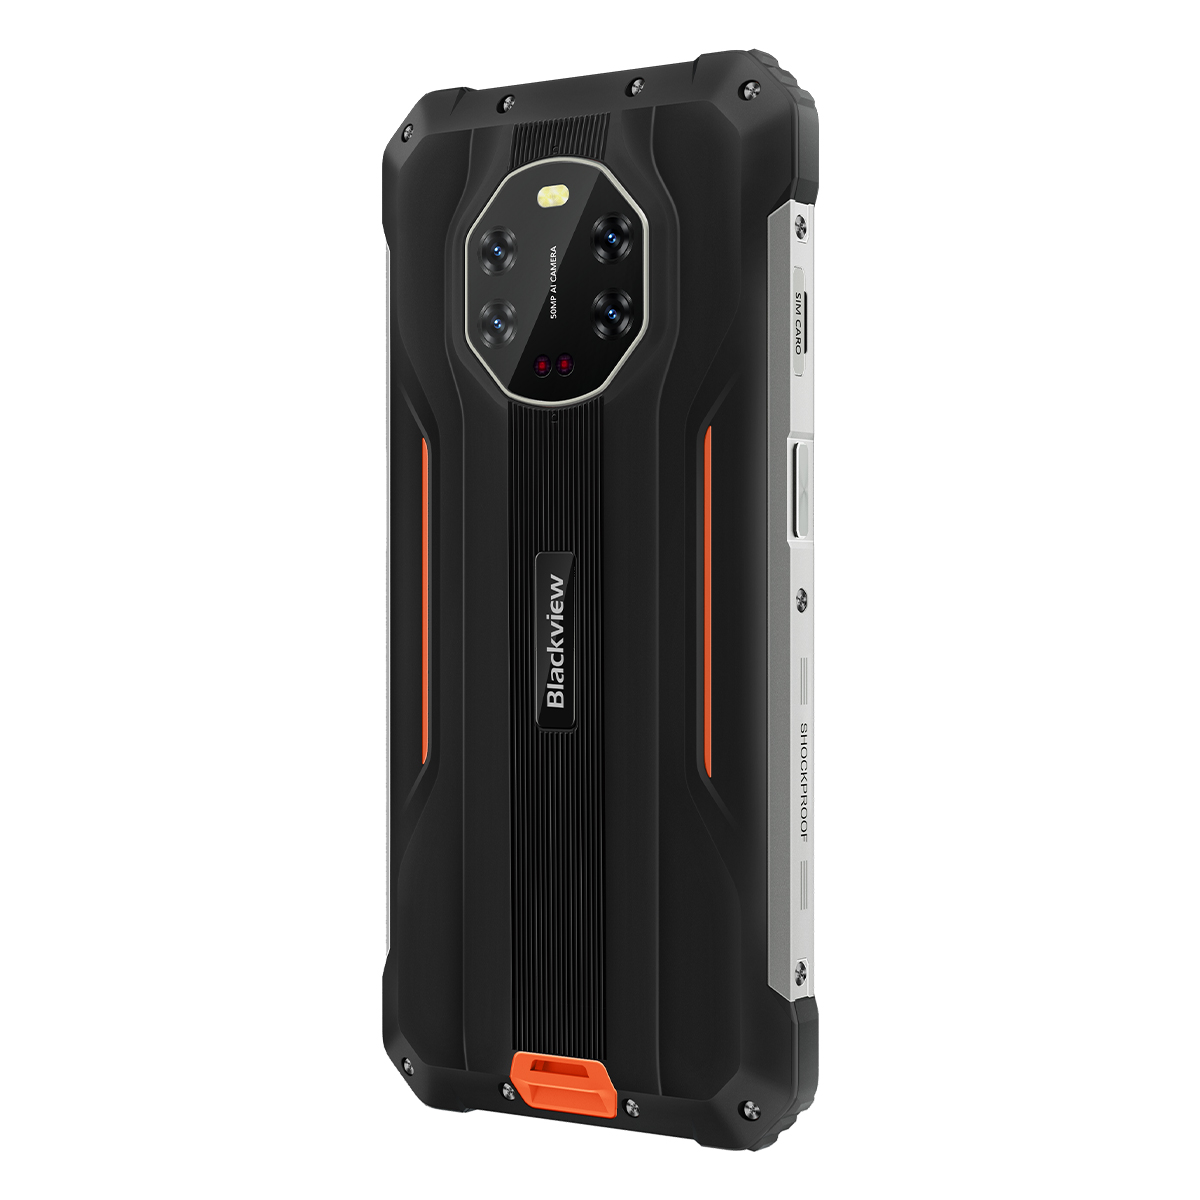 Find Blackview BL8800 5G Global Bands Dimensity 700 8GB 128GB 50MP 20MP Night Vision Camera 8380mAh 6 58 inch Display IP68 IP69K Waterproof NFC Smartphone for Sale on Gipsybee.com with cryptocurrencies